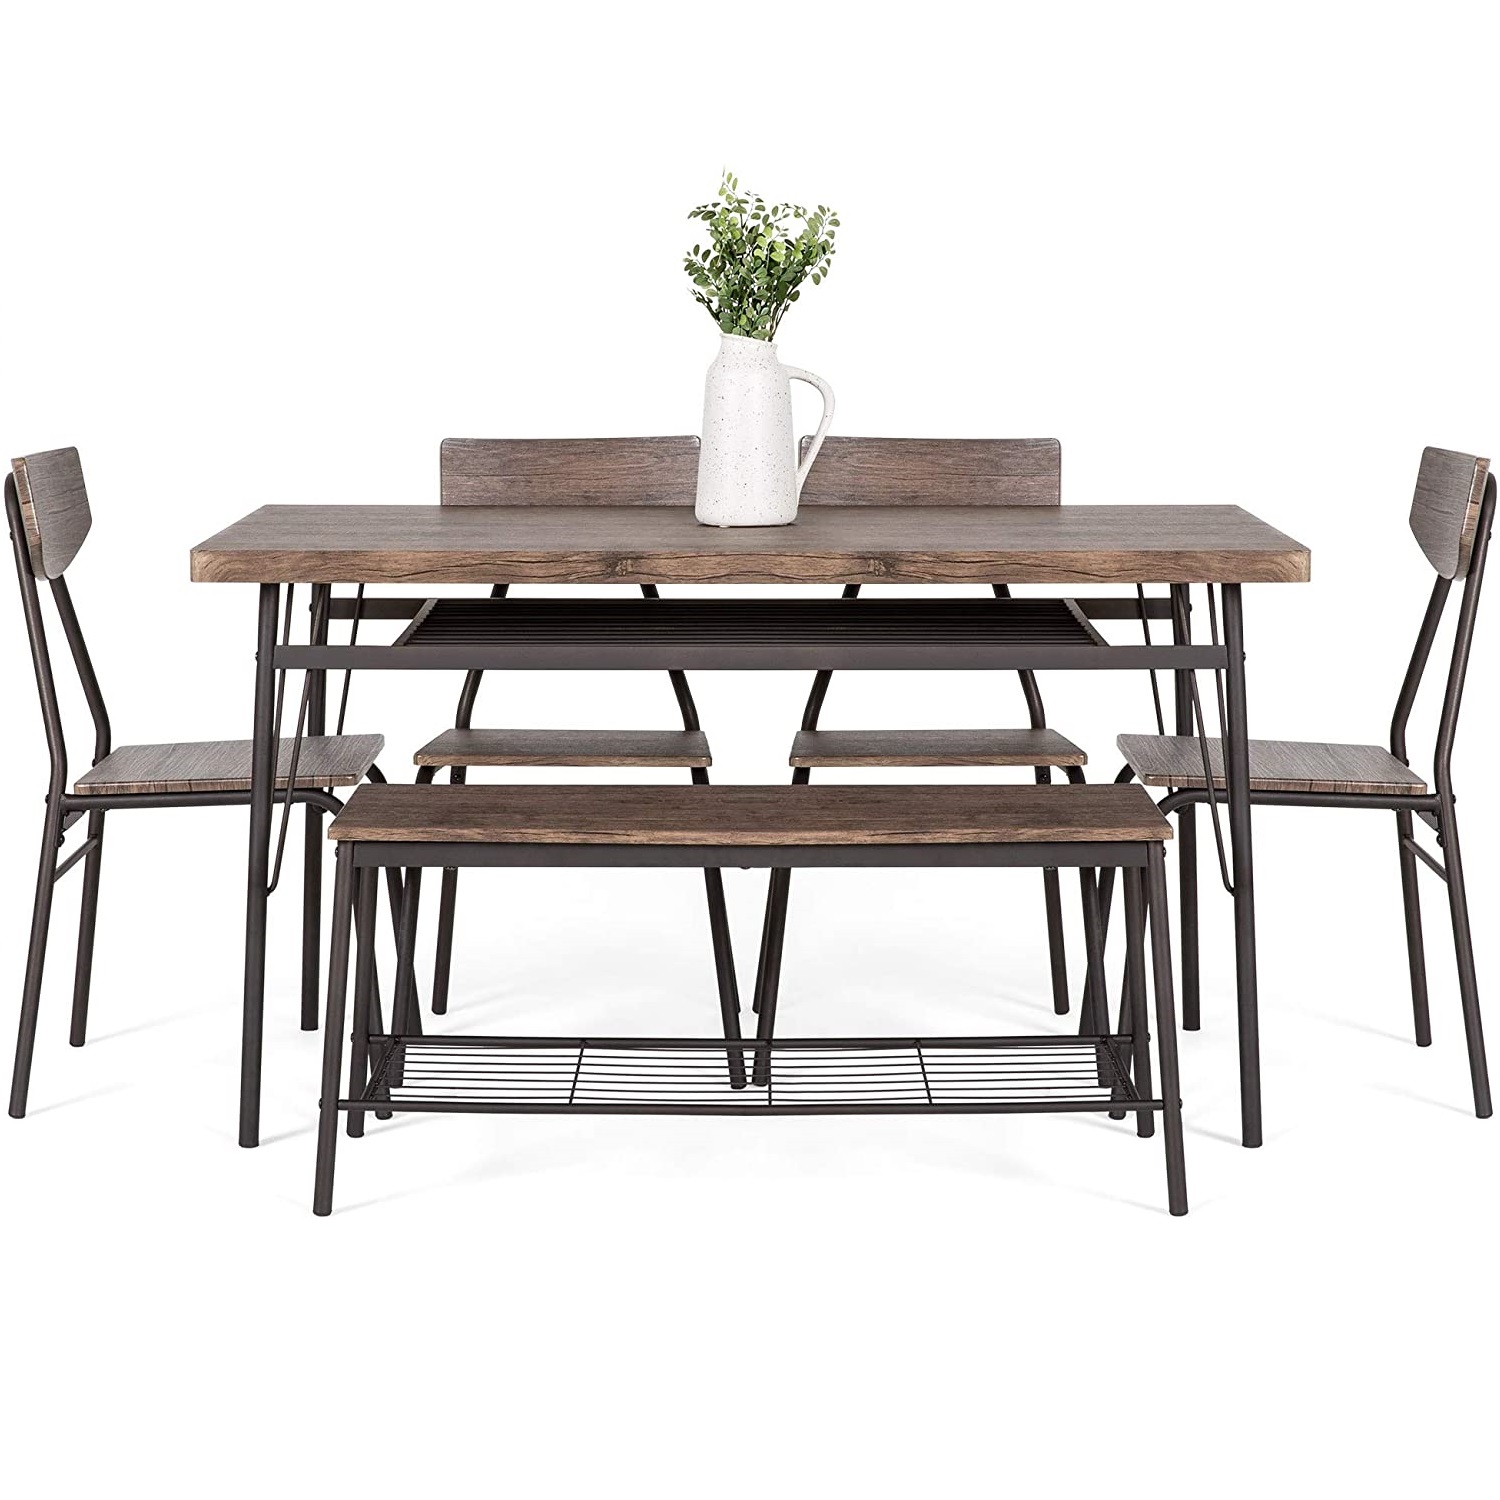 6-Piece 55in Modern Home Dining Set w/Storage Racks, Rectangular Table, Bench, 4 Chairs – Brown Featured Image